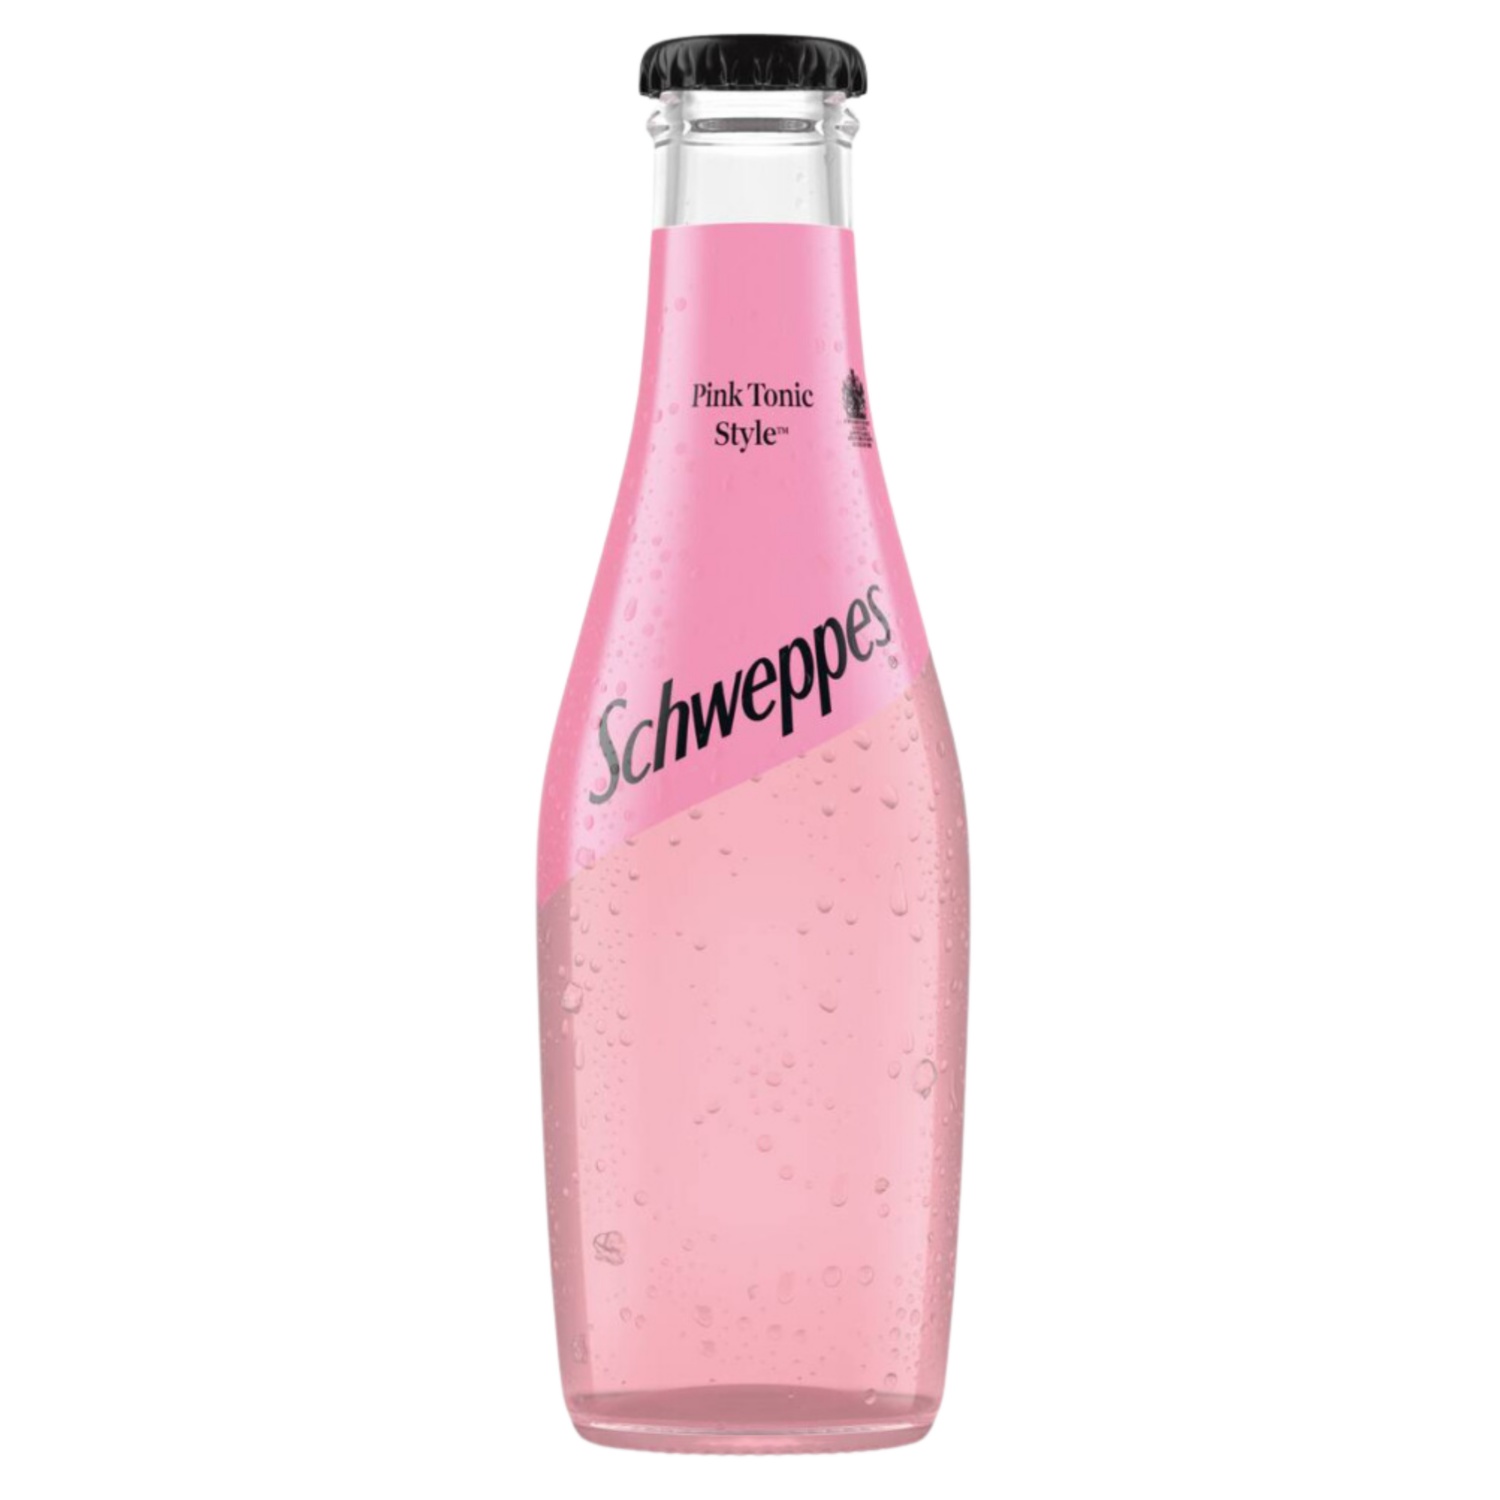 SCHWEPPES Schweppes, Pink Tonic Style